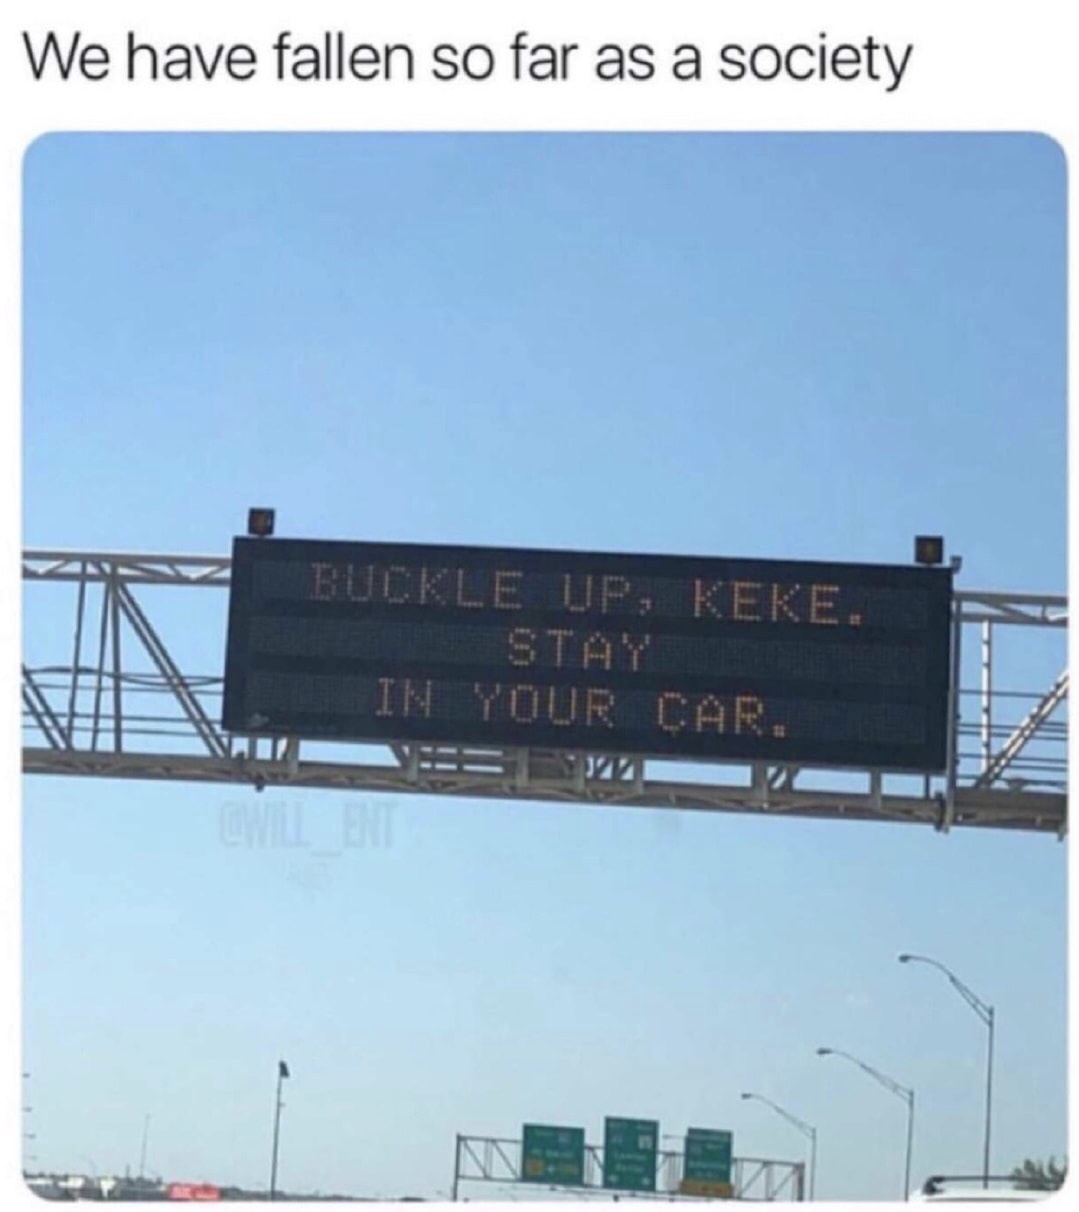 memes - street sign - We have fallen so far as a society Buckle Up, Keke. In Your Car.